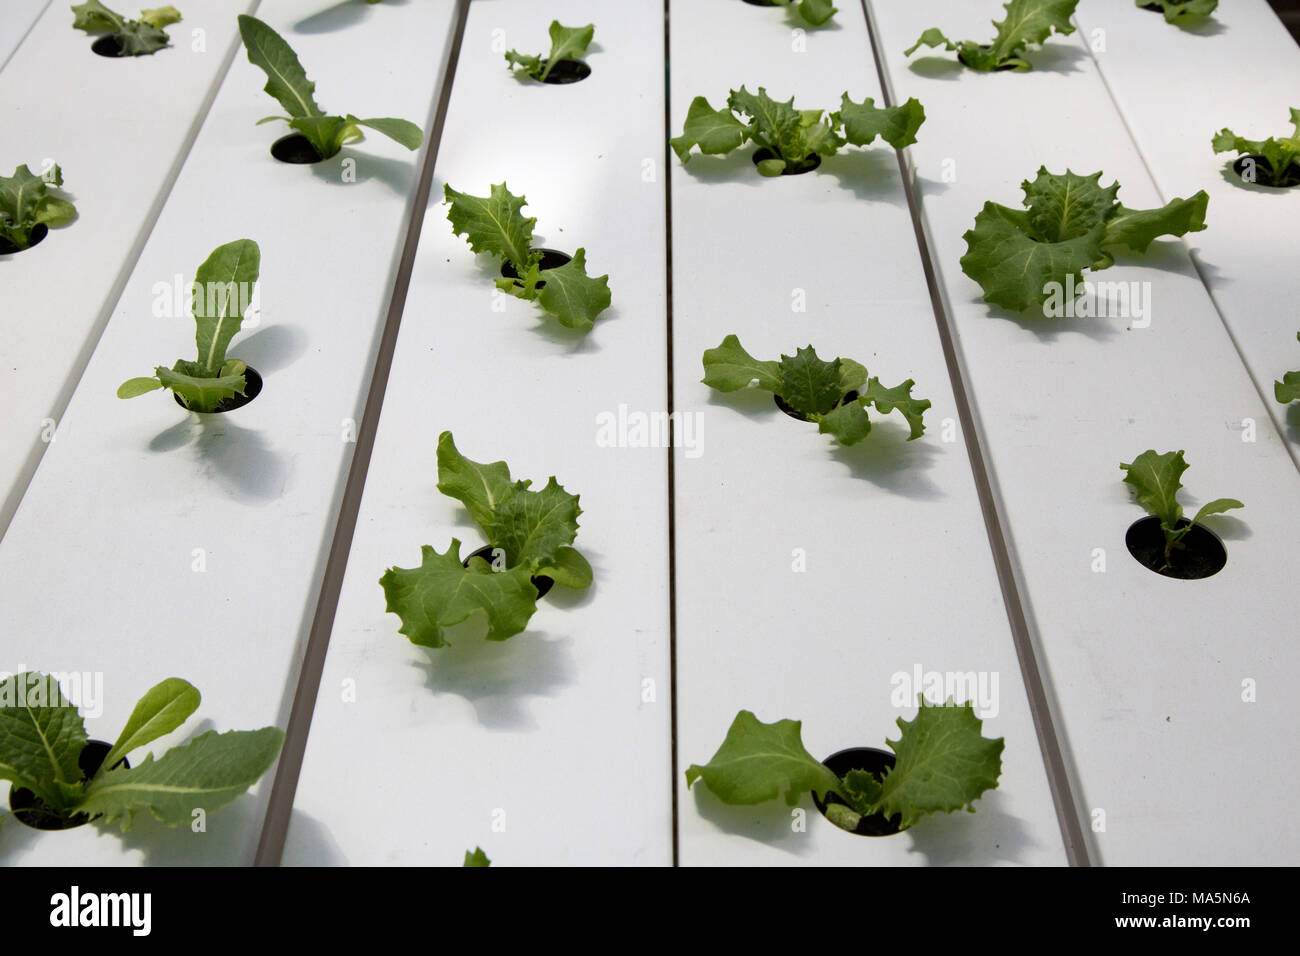 Hydroponic Agriculture.  Greenhouse Growing Lettuce. Dyersville, Iowa, USA. Stock Photo